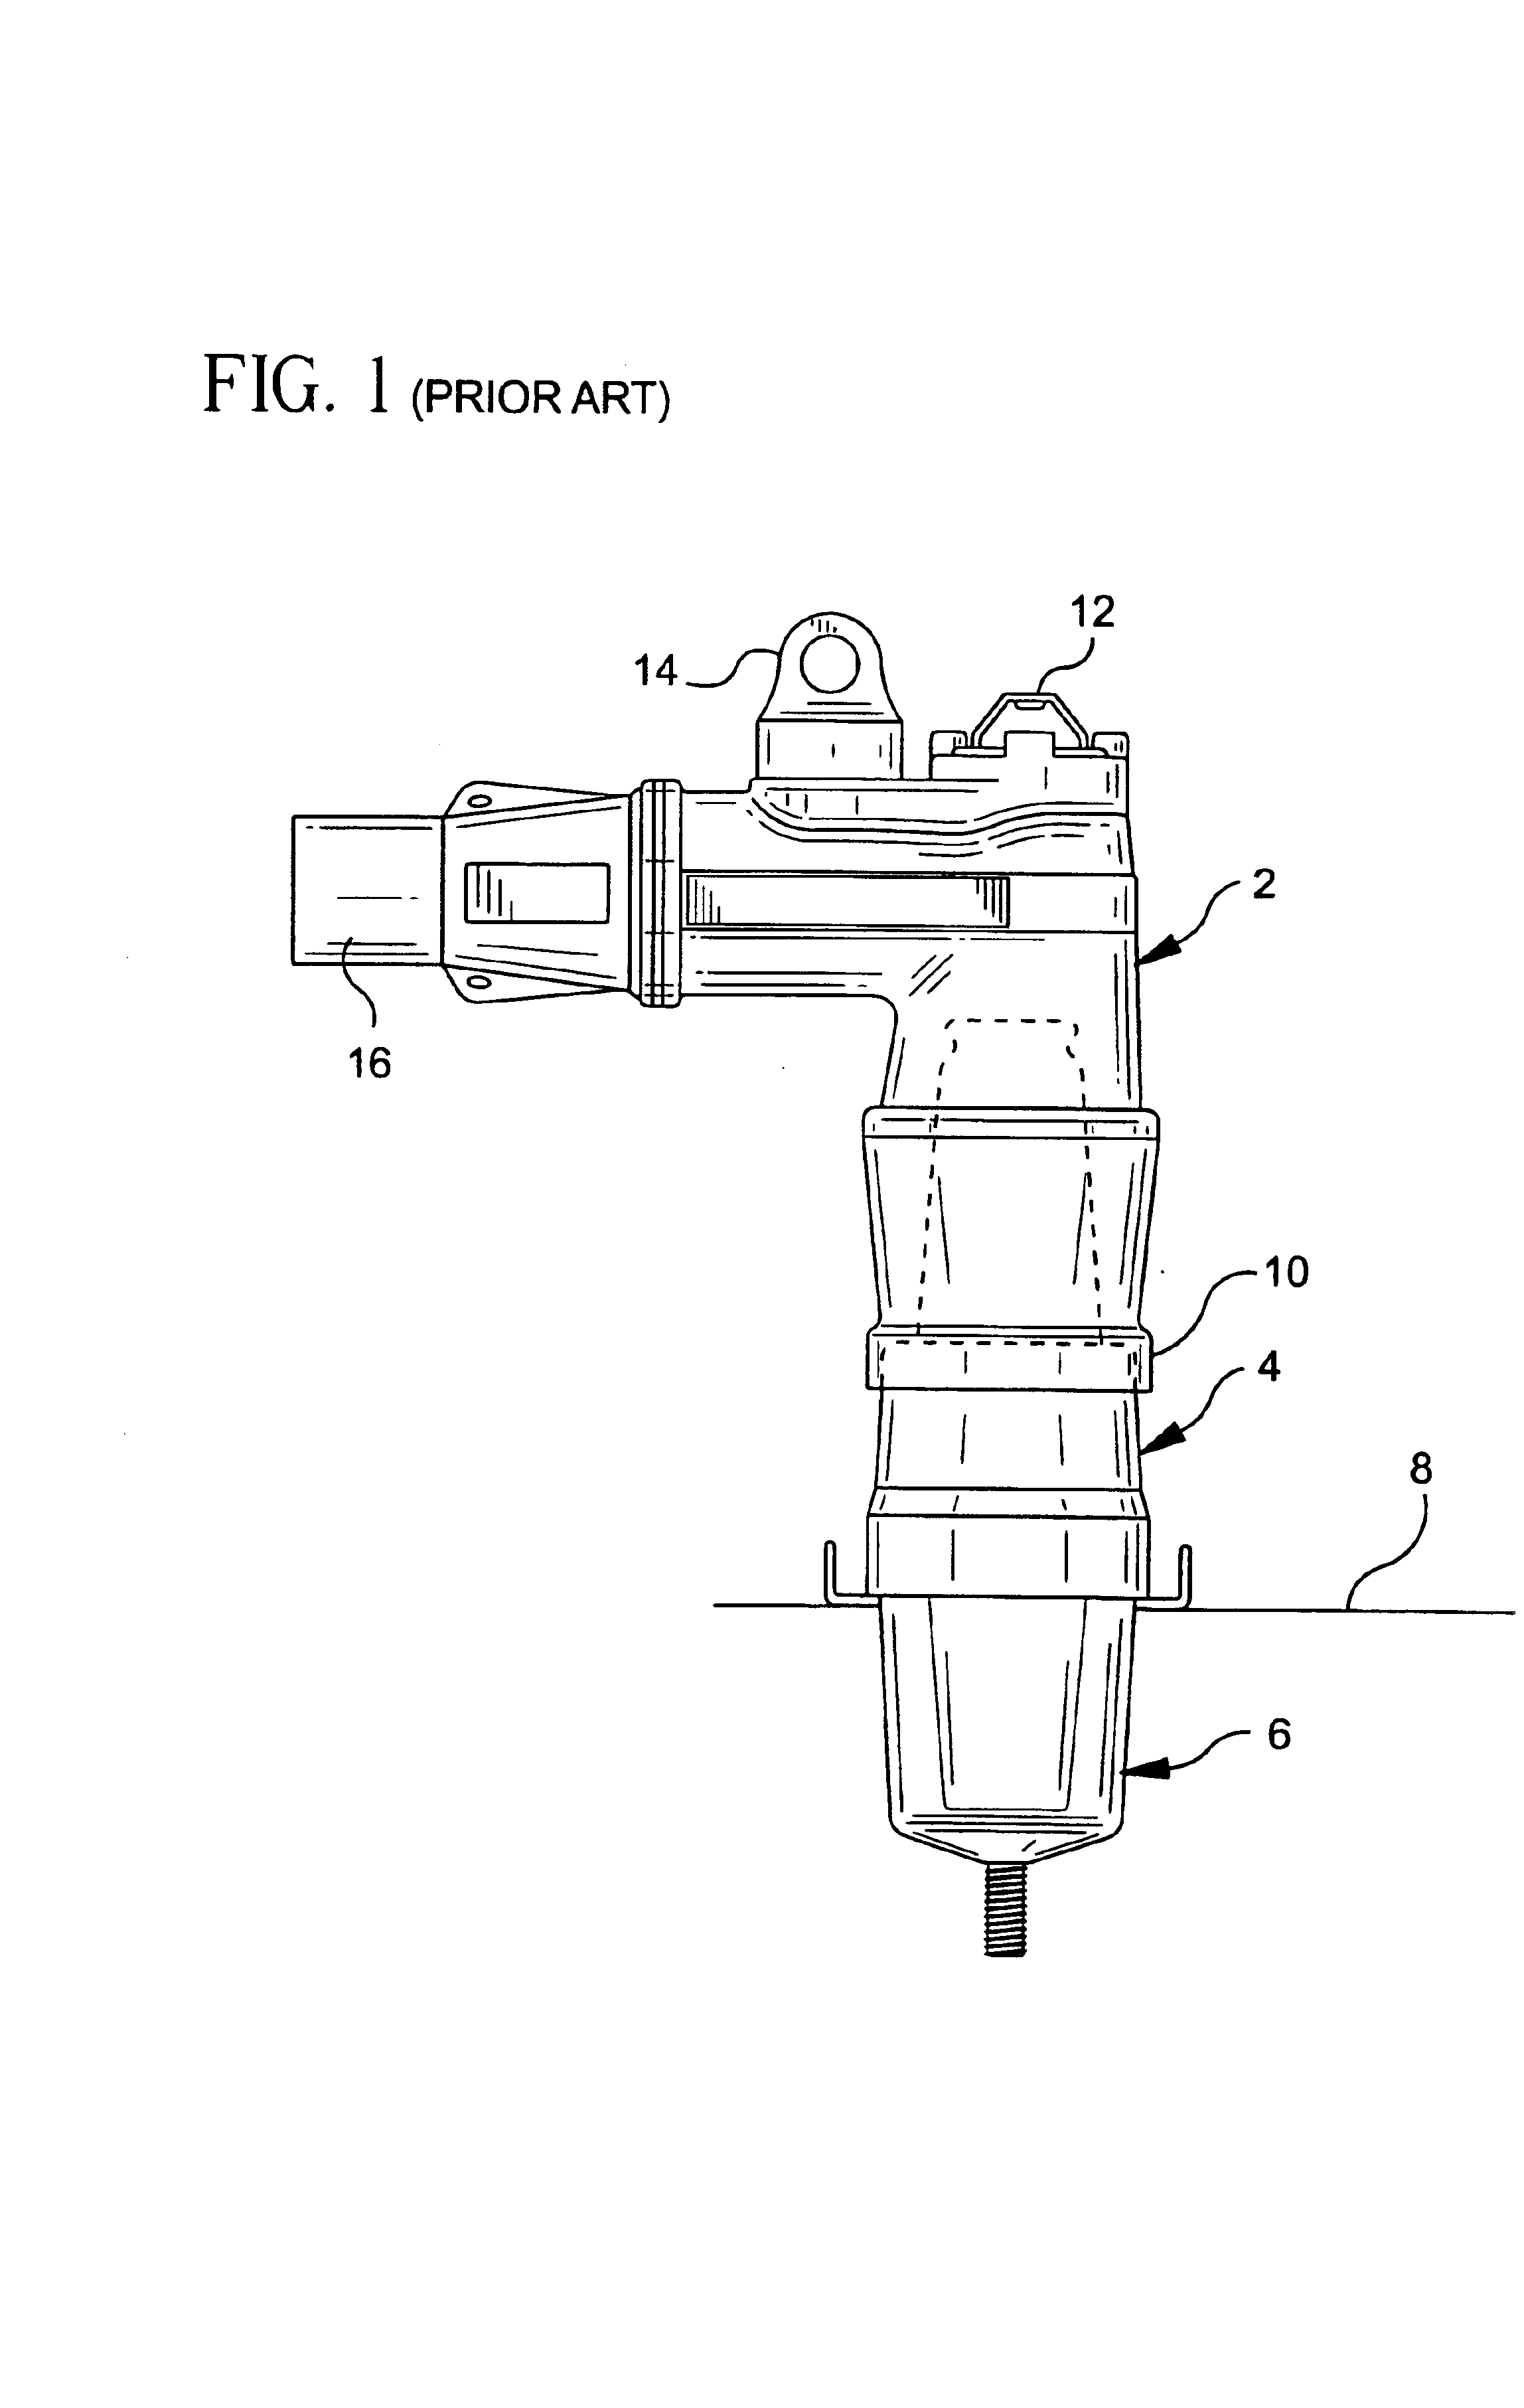 Electrical connector with voltage detection point insulation shield